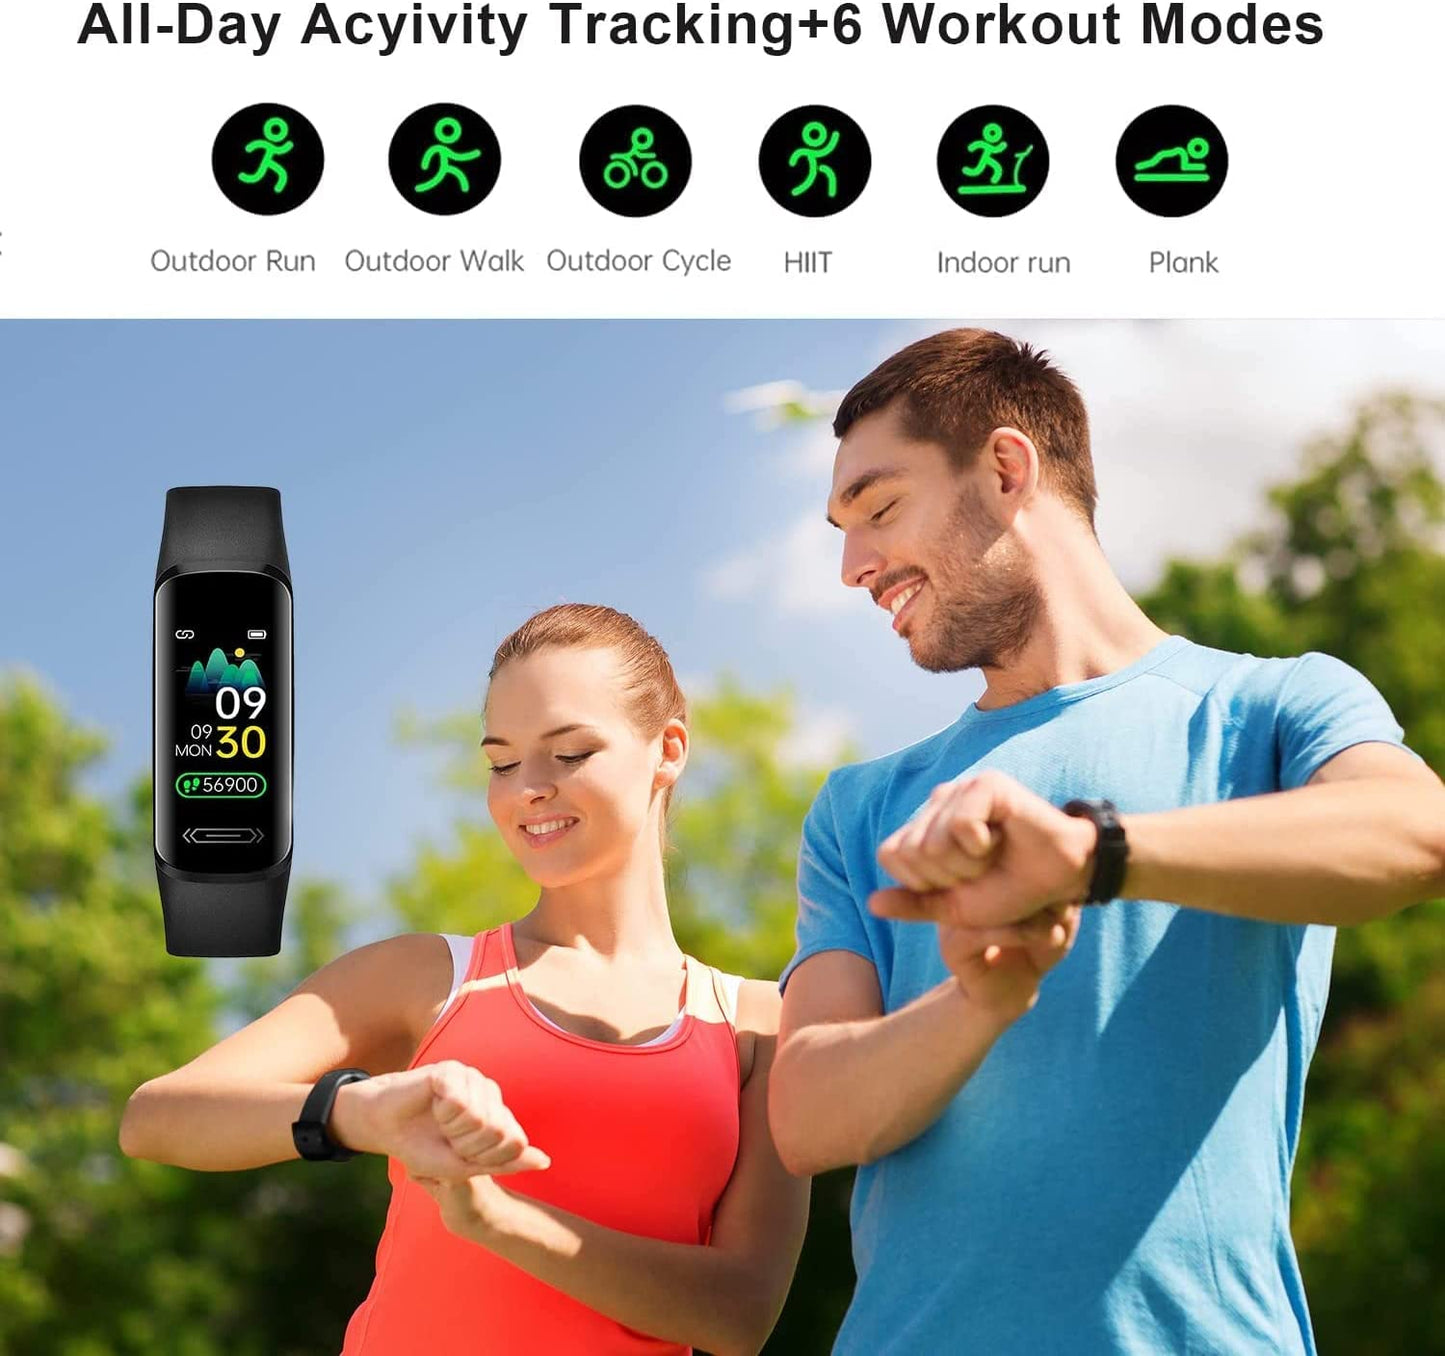 Fitness Tracker HR, Activity Fitness Trackers with Body Temperature Heart Rate Sleep Health Blood Pressure Monitor, IP68 Waterproof Calorie Steps Counter Tracker Pedometer Watch for Men Women Teens